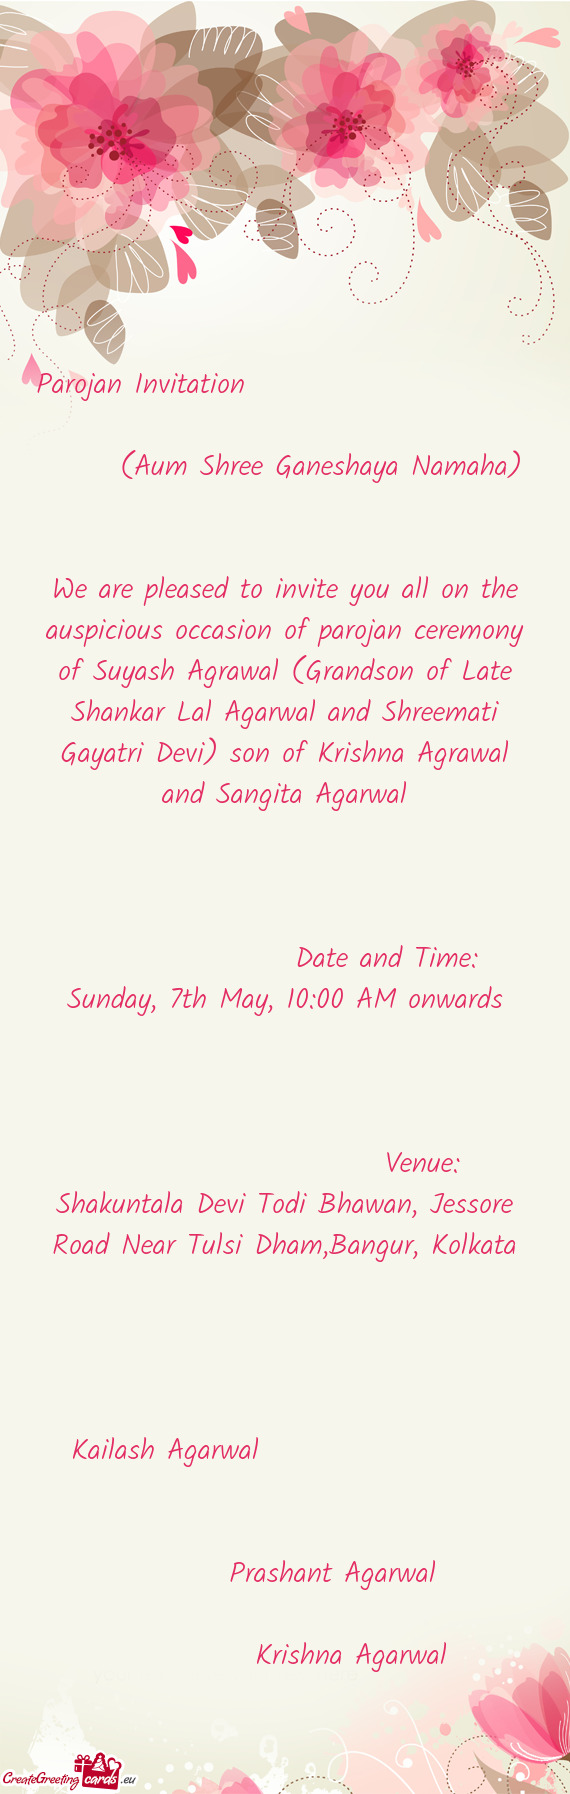 We are pleased to invite you all on the auspicious occasion